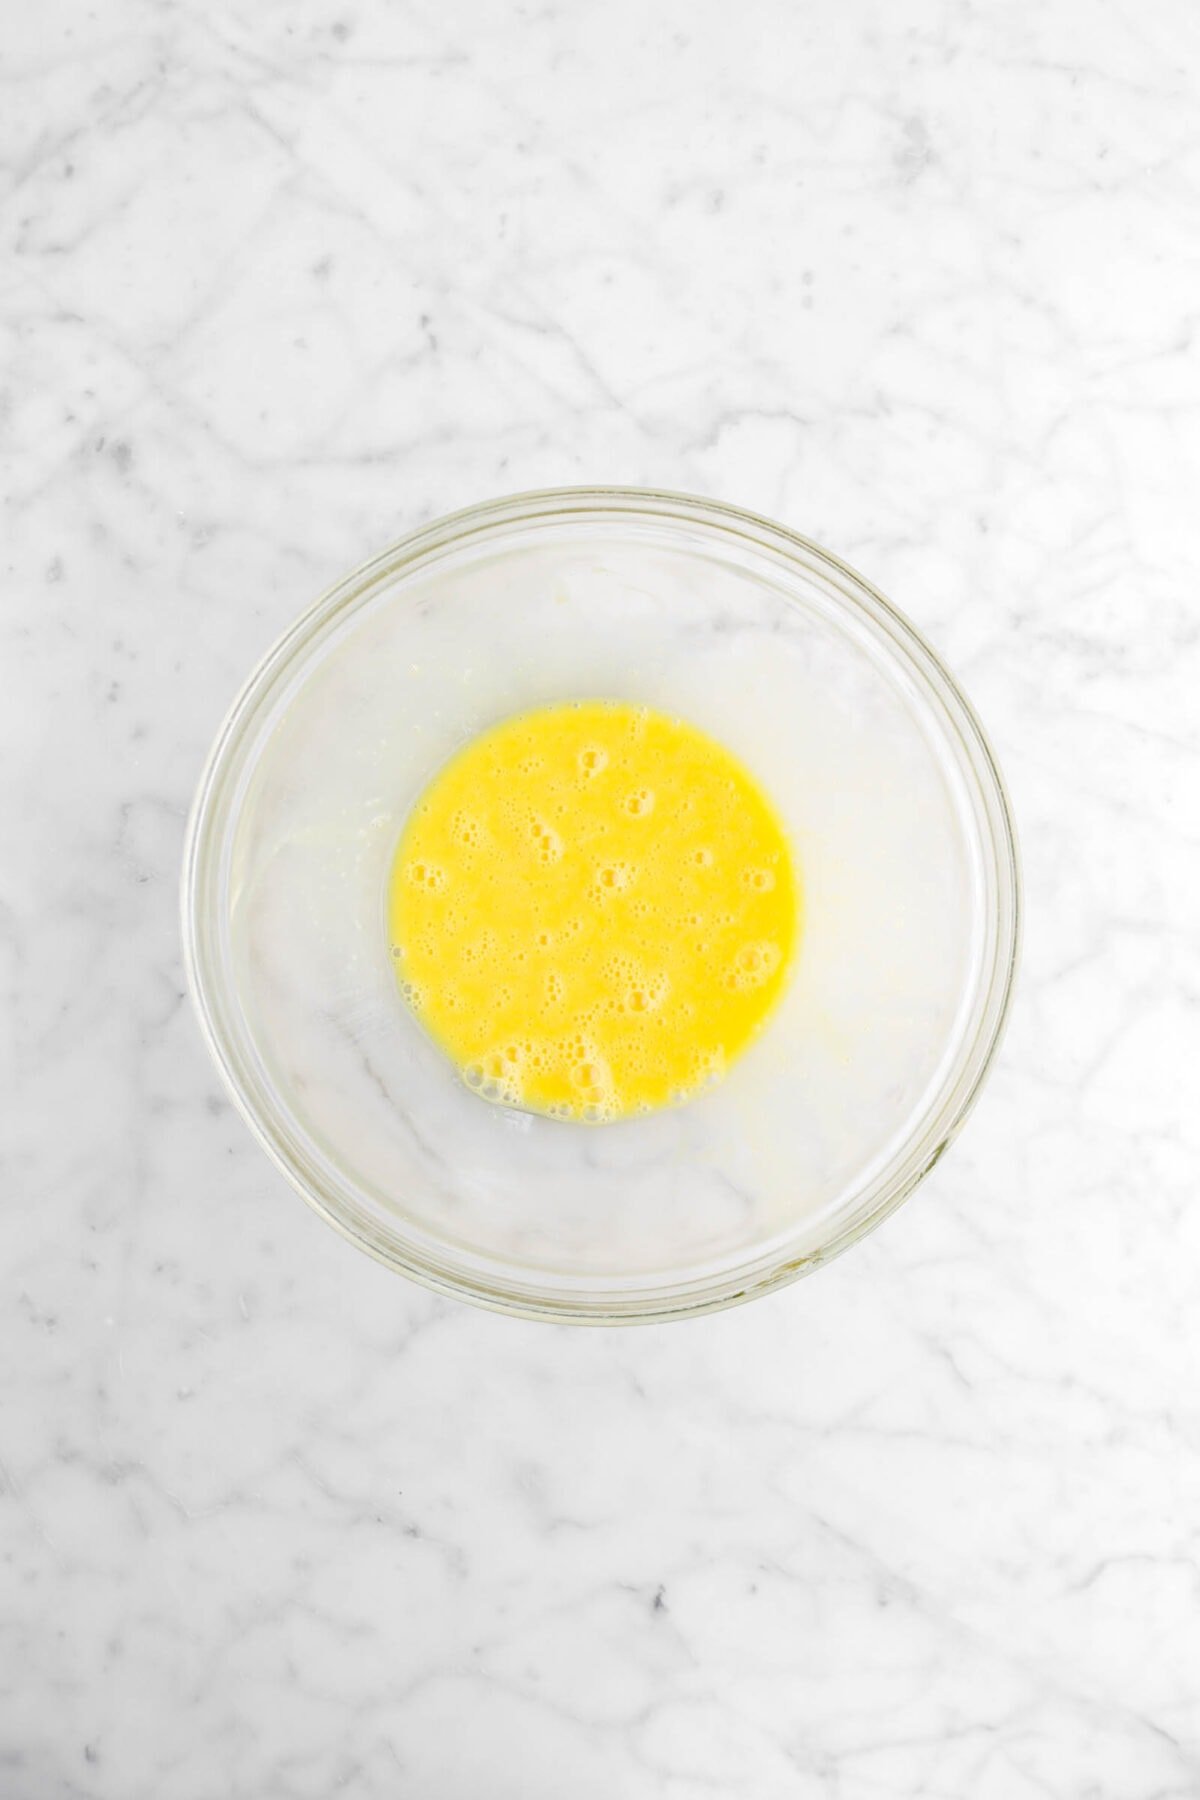 whisked eggs in glass bowl